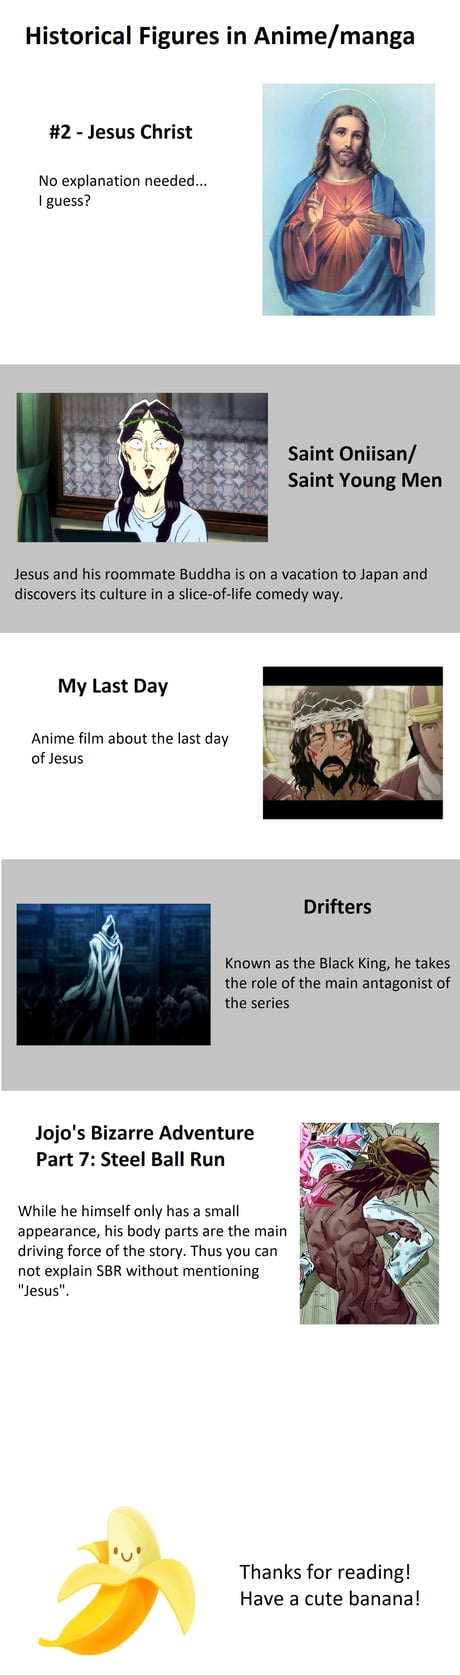 Drifters: Is The Black King Really Jesus Christ?